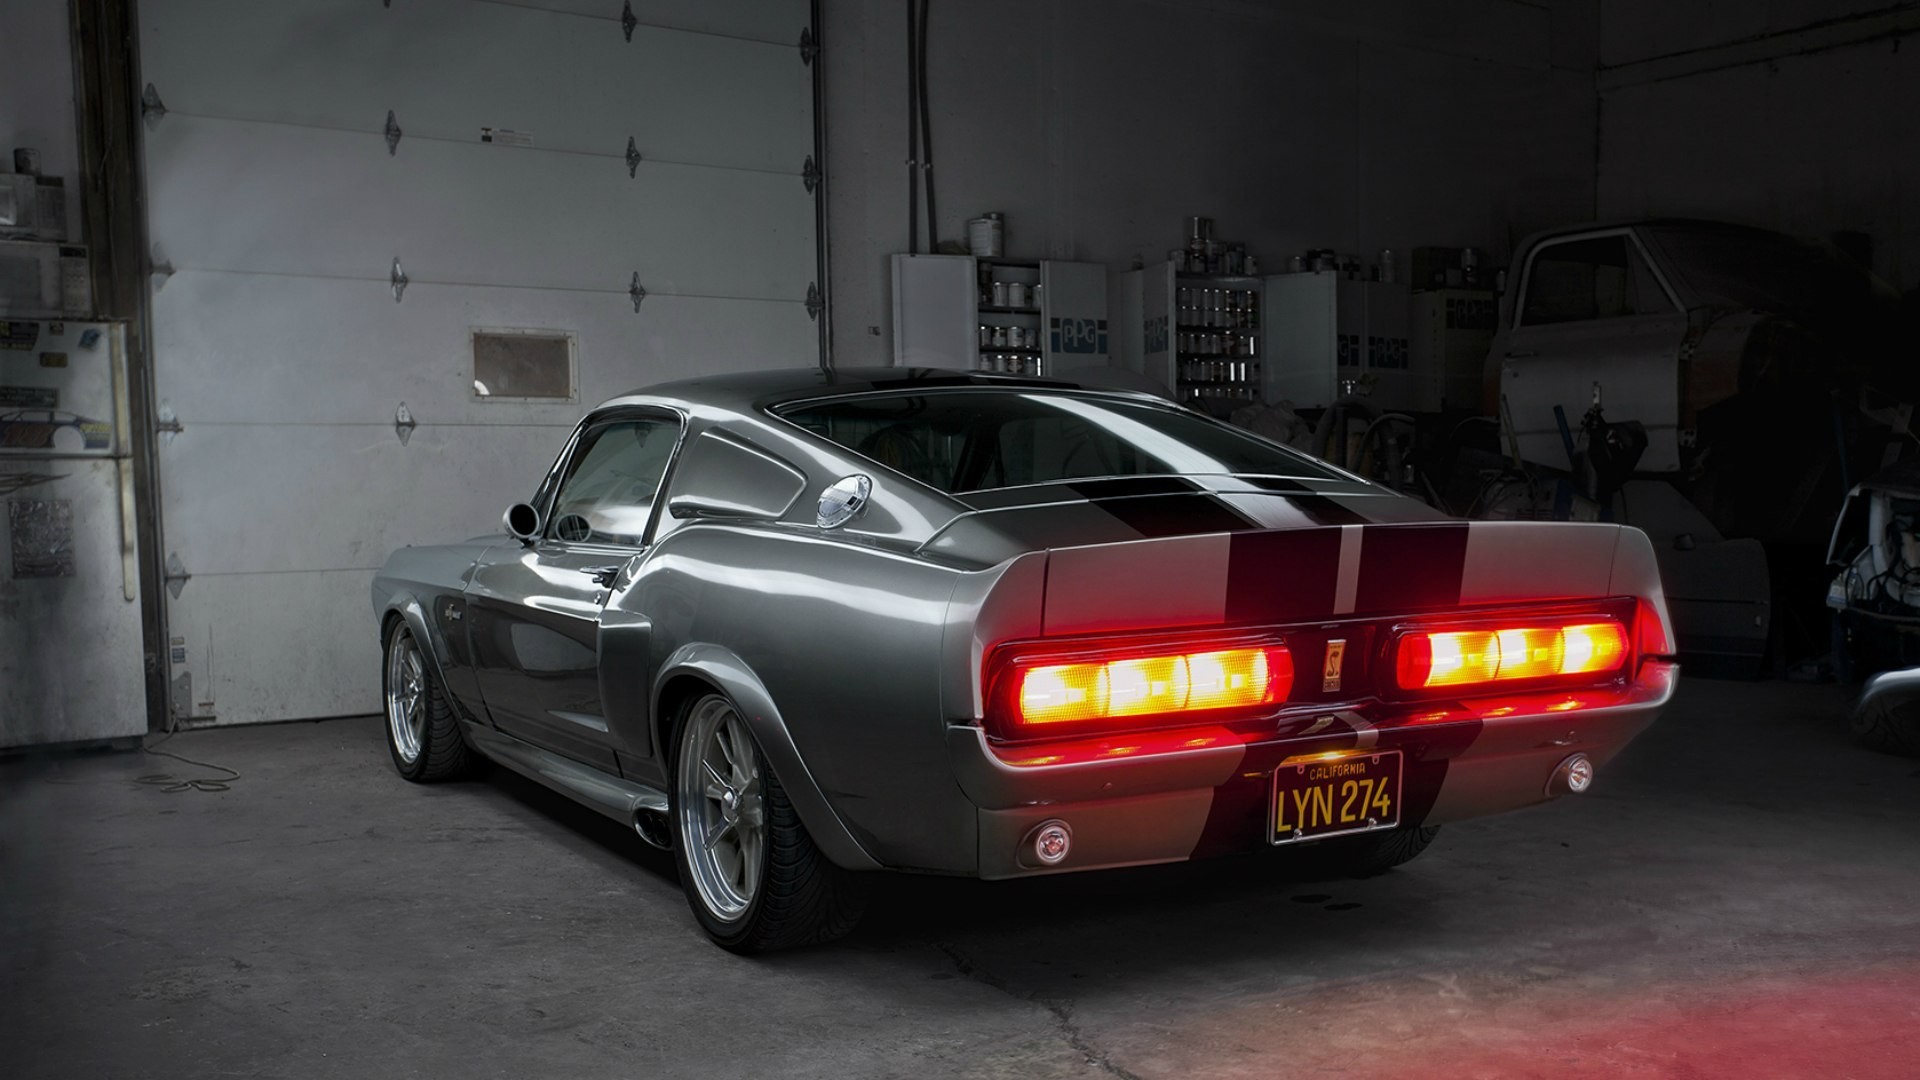 Ford shelby gt500 tail lights